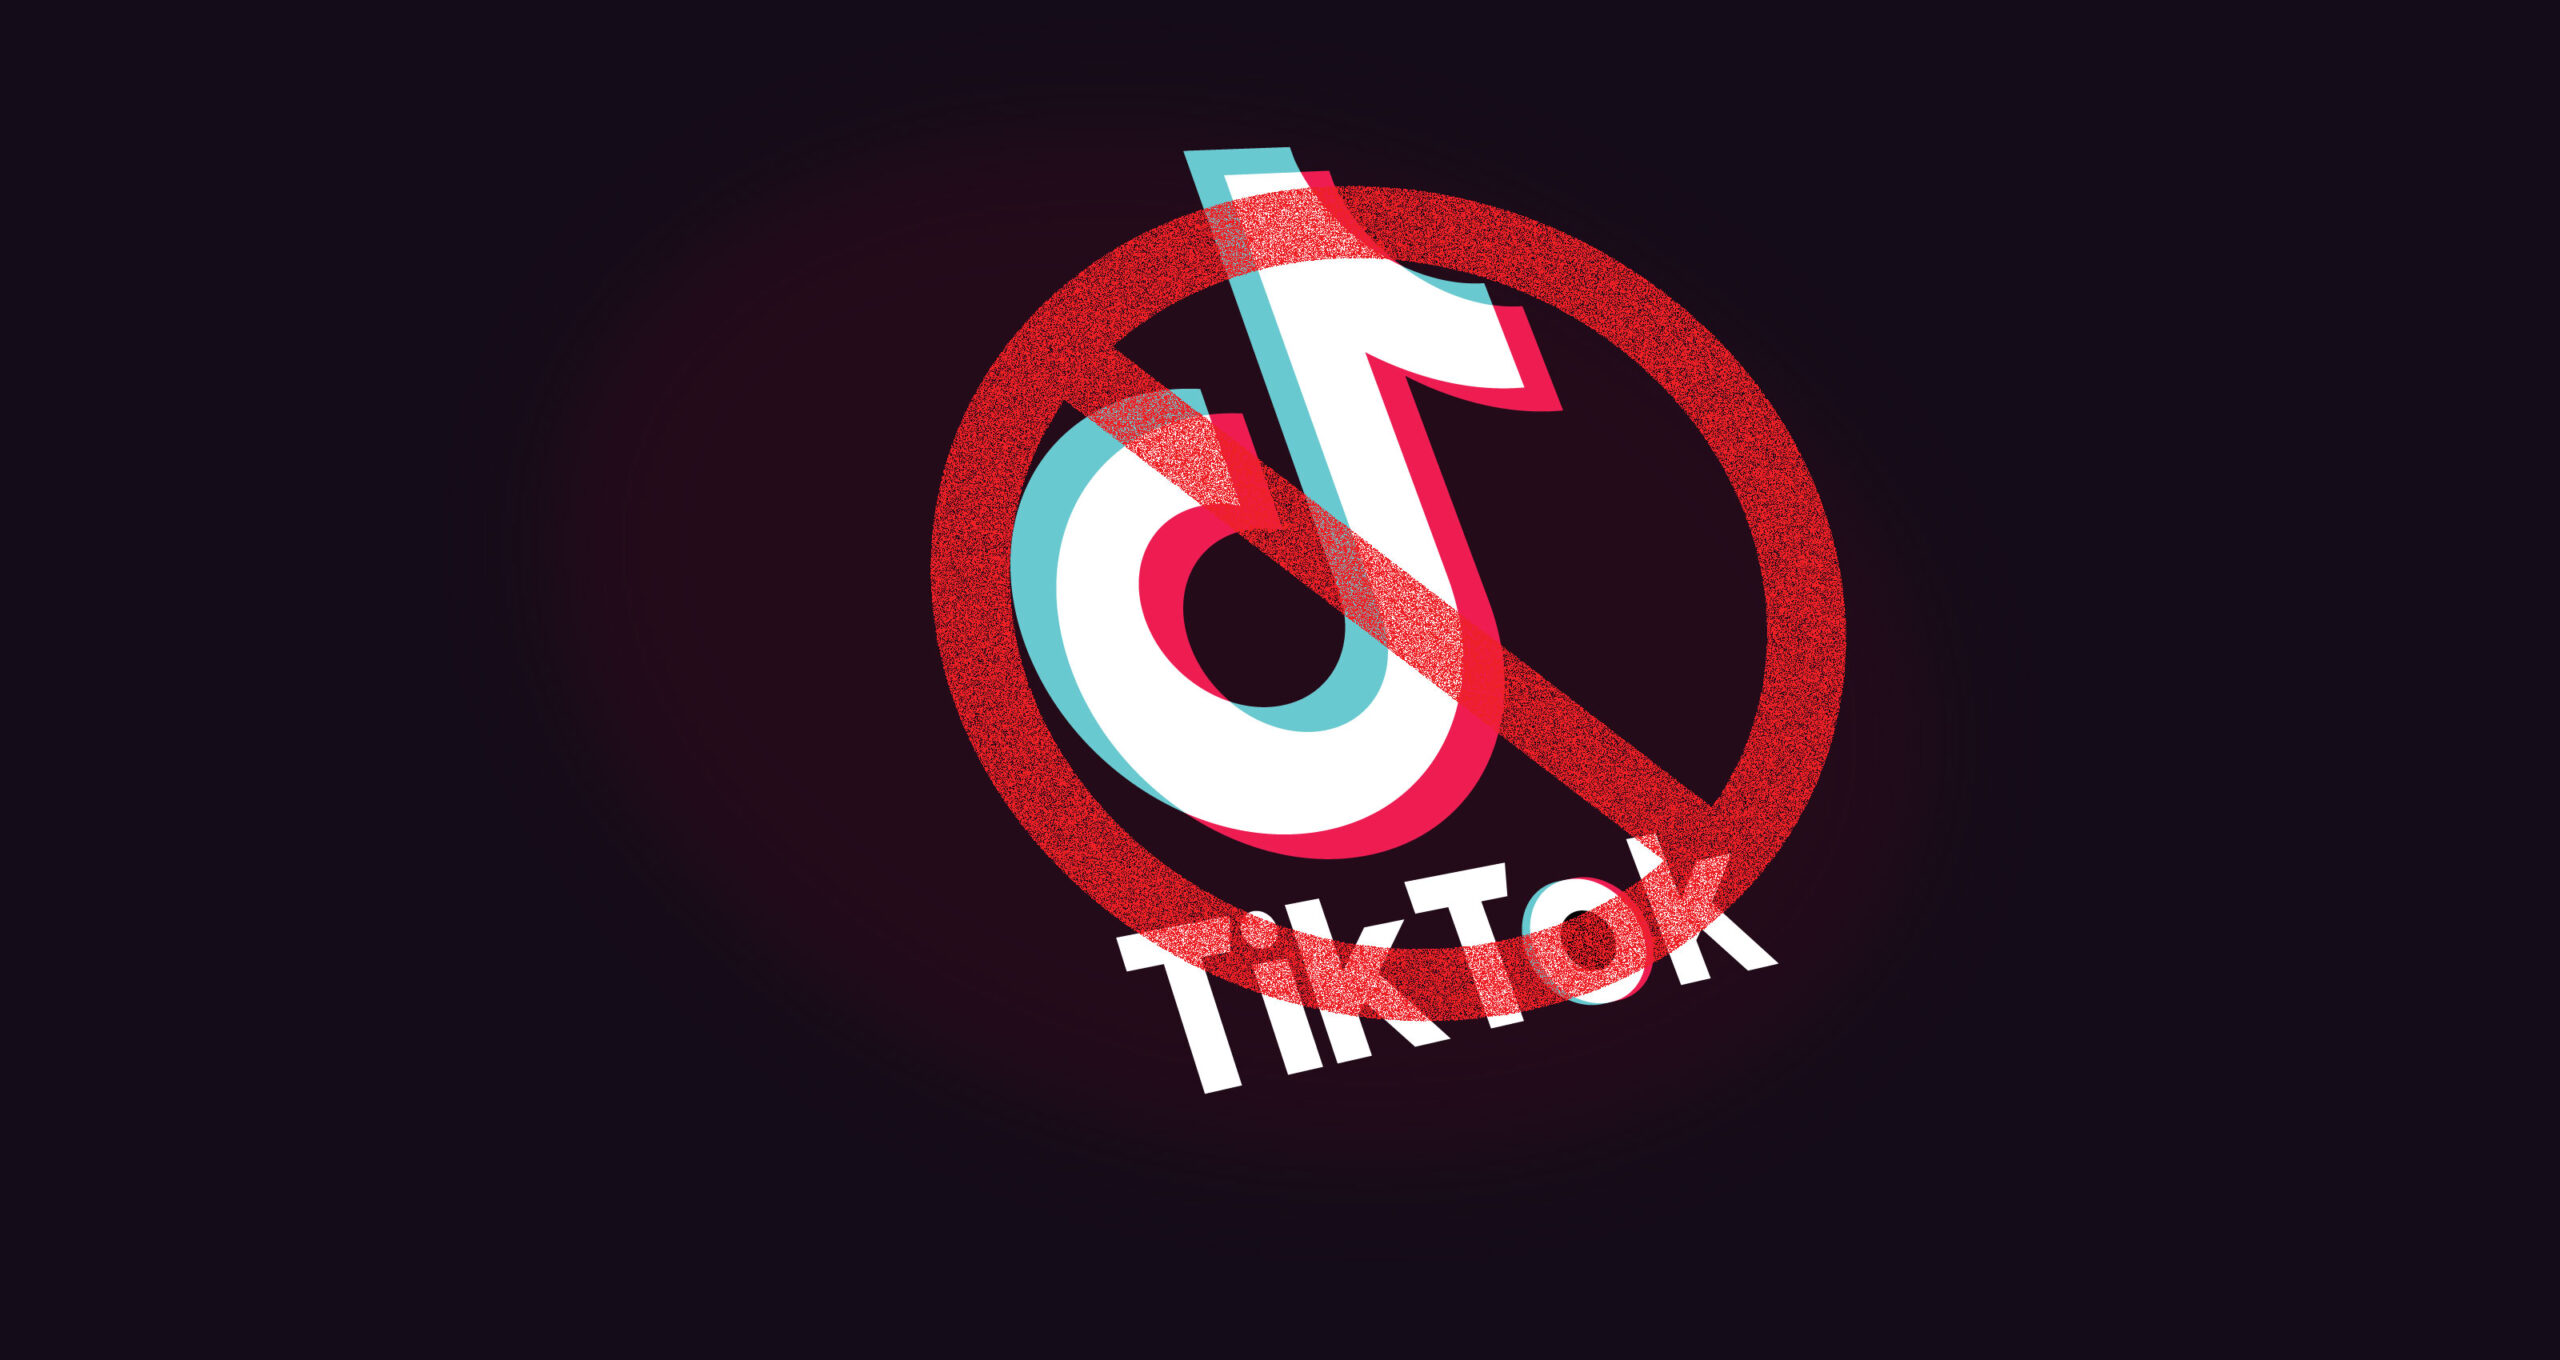 Why Is It The Right Time To Ban TikTok In Pakistan? Have you ever been told you are too old to understand TikTok? If yes, you aren’t probably too old, but you are rightly mature to steer clear of the platform. It is a time bomb in the making, or if aptly put out – a time bomb waiting to be blown off. Everywhere you see, especially in India and Pakistan, TikTok is all the rage among the youth. But, at what cost? TikTok & Mental Health Among all the other nuisances, the effect of TikTok on mental health outdo all. The problematic nature of the platform is as such that it has become a reason for suicide, social isolation, depression, bullying, and narcissism. It is a double-edged sword. Those who are popular, tend to develop narcissistic values and would do anything to make sure their popularity chart is only on the rise. On the other hand, those who are striving to make sure they do reach the same fame develop tendencies on depression, isolation, and self-esteem issues. TikTok, Bullying & Pakistan Recently, with a few TikToker’s videos being leaked on the internet, there is no denying that it has the tendency to take lives away. From nudes to body shaming, from unethical content to moral debauchery – there is nothing good in the TikTok content we see in Pakistan. While the world appreciates TikTok for its tendency to provide a creative outlet, more than half the Pakistani populace has decided to make it a place for bullying, harassment, and whatnot. There might be an ounce of responsibility and awareness with the app being used by people around the world, but in Pakistan, it is not. It has become an ultimate meme-generation platform with nothing but baseless content, nudity, bullying, public shaming, and wastage of talent among a long list of other problematic issues. BAN TIKTOK! Now coming to the point at hand, we feel that it is the right time to ban the app in the country. The app in itself is one of the most creative social media to exist, but with the users that we have in Pakistan, it isn’t the right one to be used. From Minahil Malik’s personal videos with nudity being leaked to Alleena Fatima being body-shamed and harassed, our users have given every reason to jeopardize lives and self-harm. When the government can ban games like PUBG, it is about time the use of TikTok is banned as well. Our people have absolutely no sense of responsibility while using social media, hence we can expect the loss of more lives due to the pressure, online bullying, and offline harassment. We do not want to use more of our creative and talented population just because there are some (read many) people who do not know how to use social media like social media. Hence, the government and the digital right entities should now sit to decide if the app is more important or the lives of your youth. 